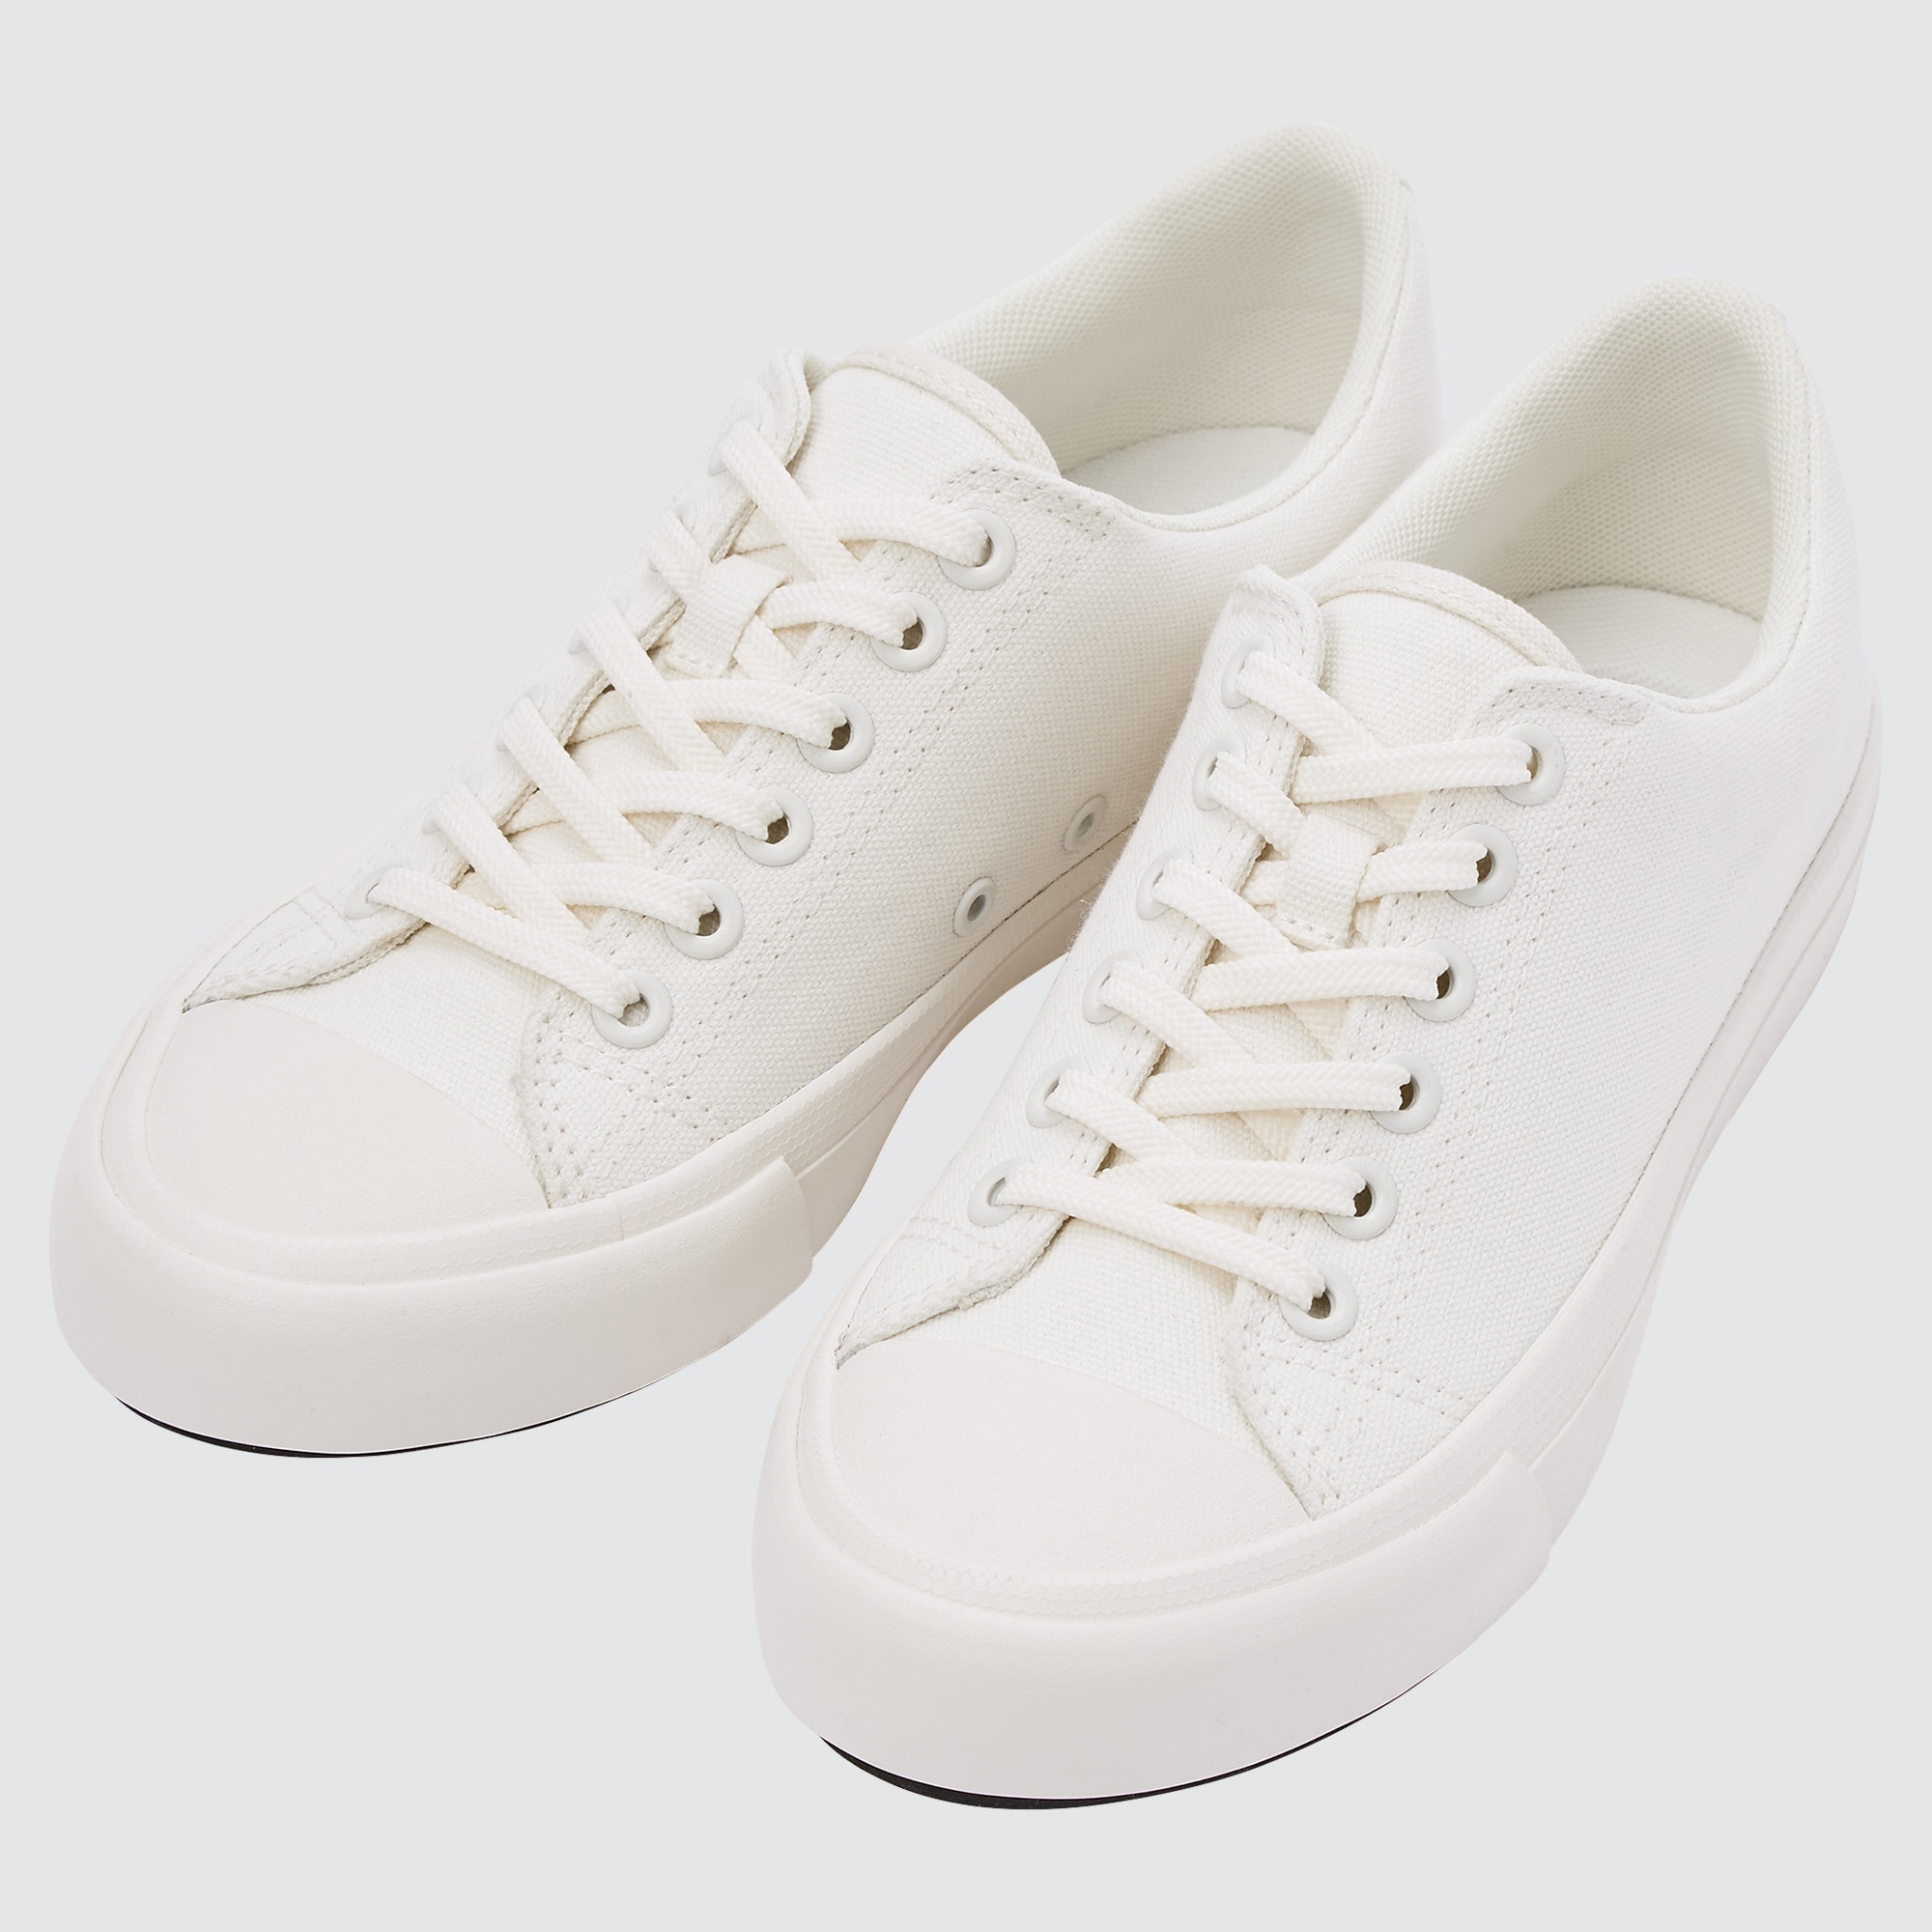 KNITTED SNEAKERS REVIEWS  UNIQLO VN